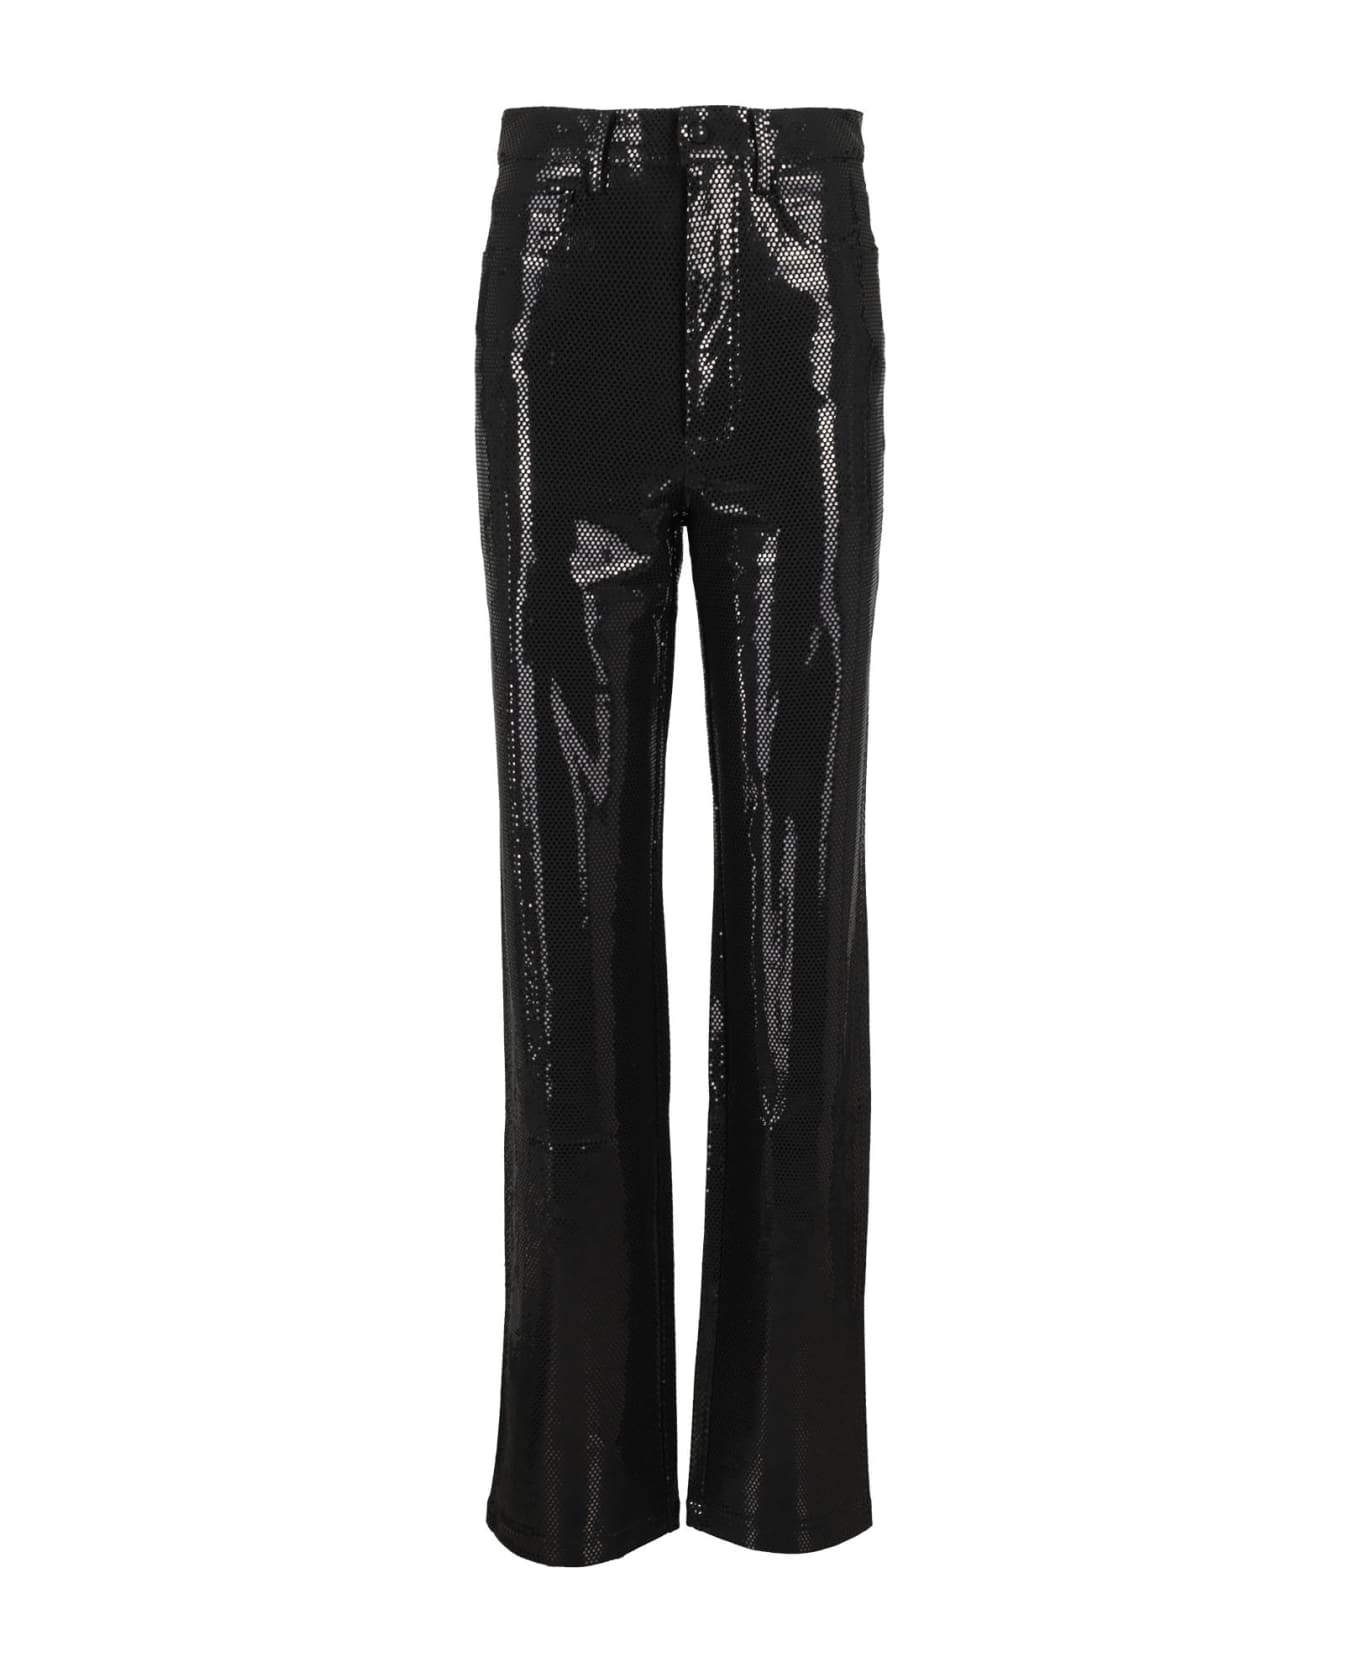 Rotate by Birger Christensen Foil Jersey Staight Pants - Black